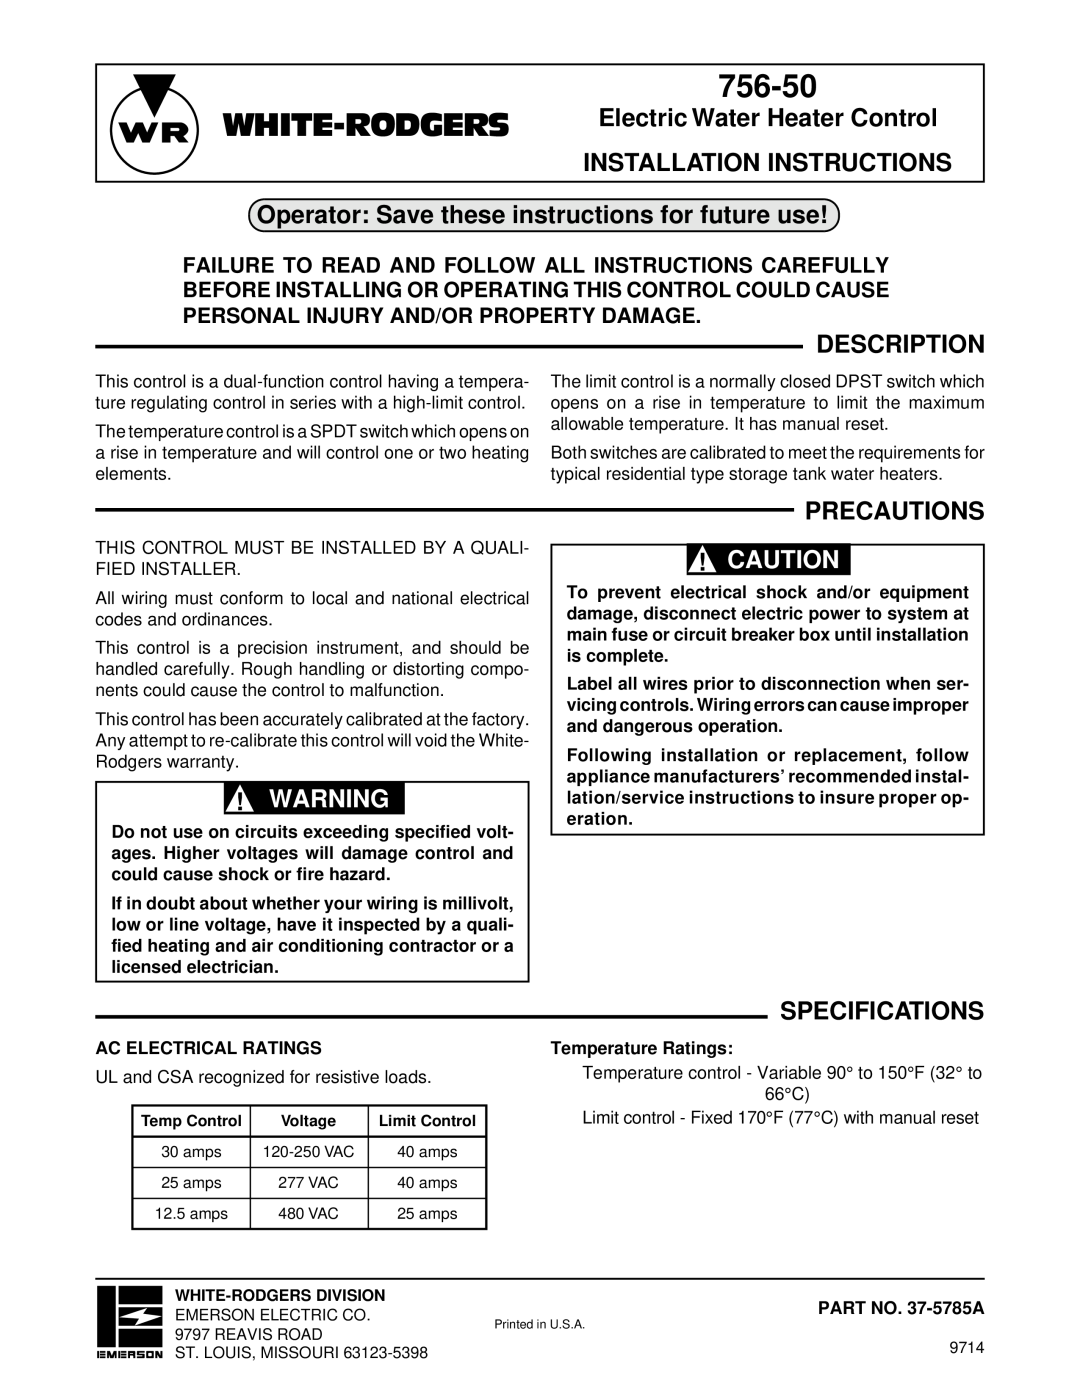 White Rodgers 37-5785A specifications 756-50, Operator Save these instructions for future use, Description, Precautions 